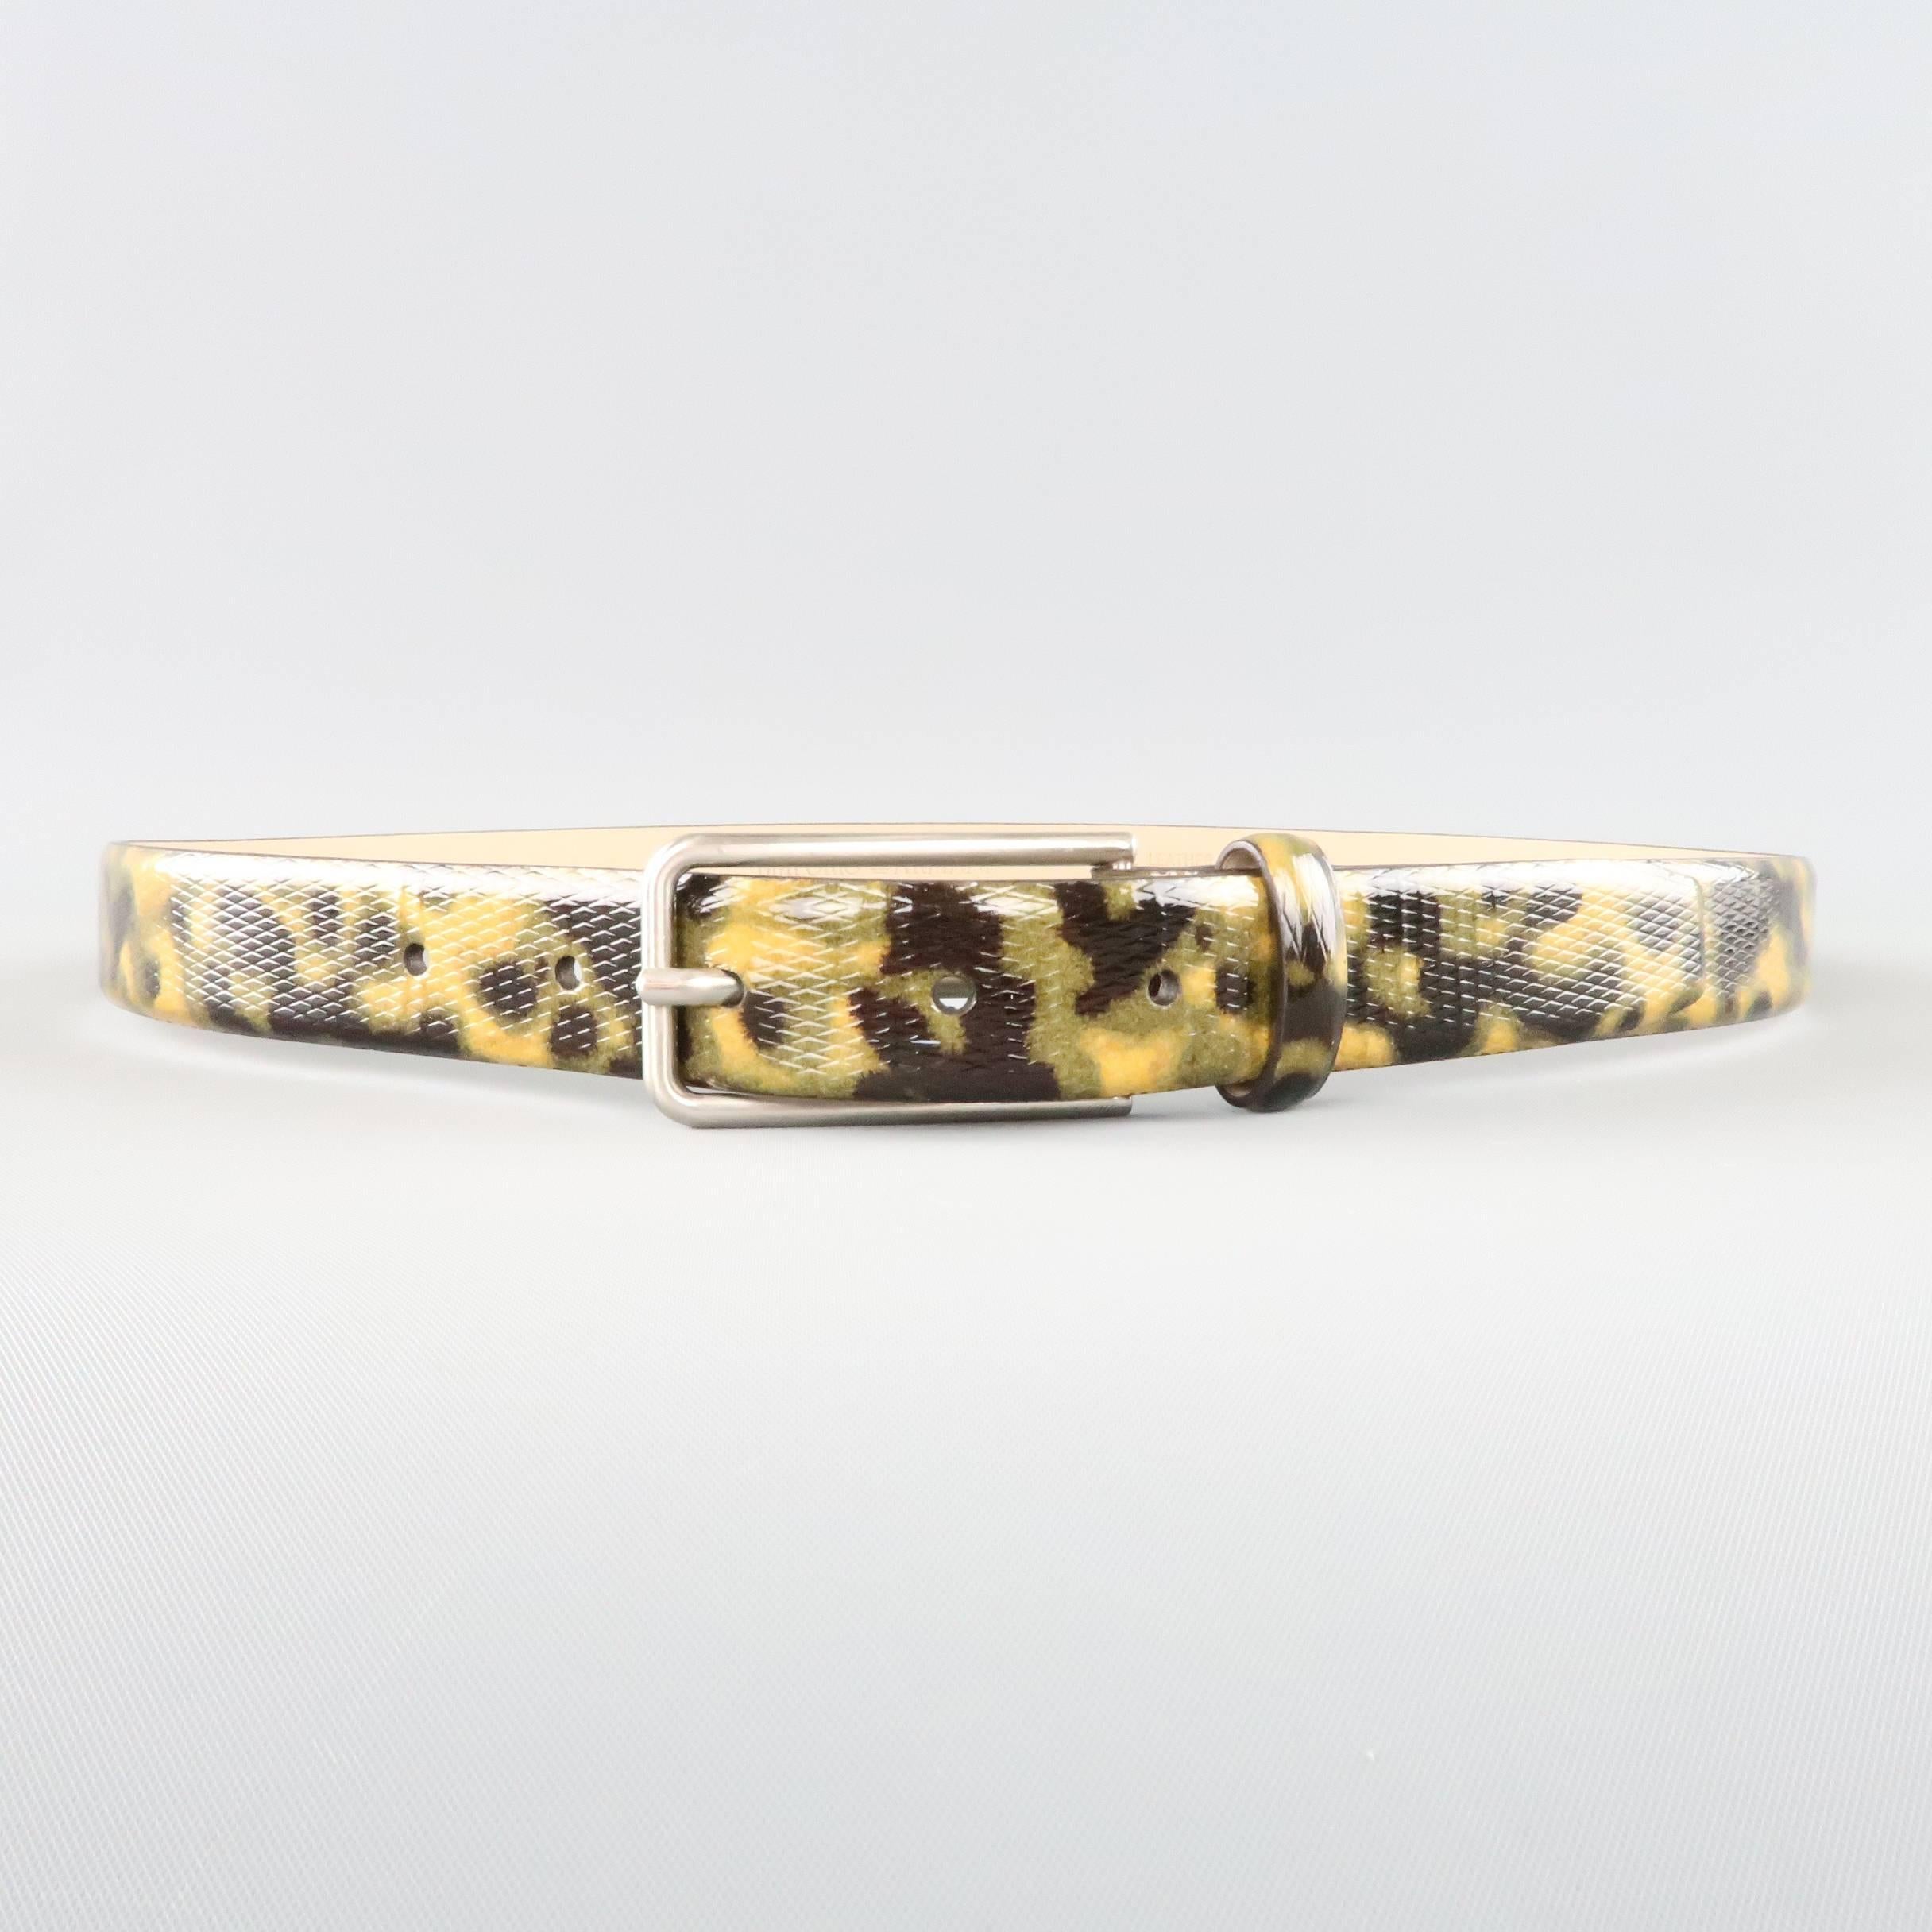 EMPORIO ARMANI dress belt comes in a unique camouflage tortoiseshell print textured patent leather with a sleek skinny silver tone buckle. Made in Italy.
 
Excellent Pre-Owned Condition.
Marked: 48
 
Length: 39 in.
Width: 1 in.
Fits: 32-36 in.

SKU: